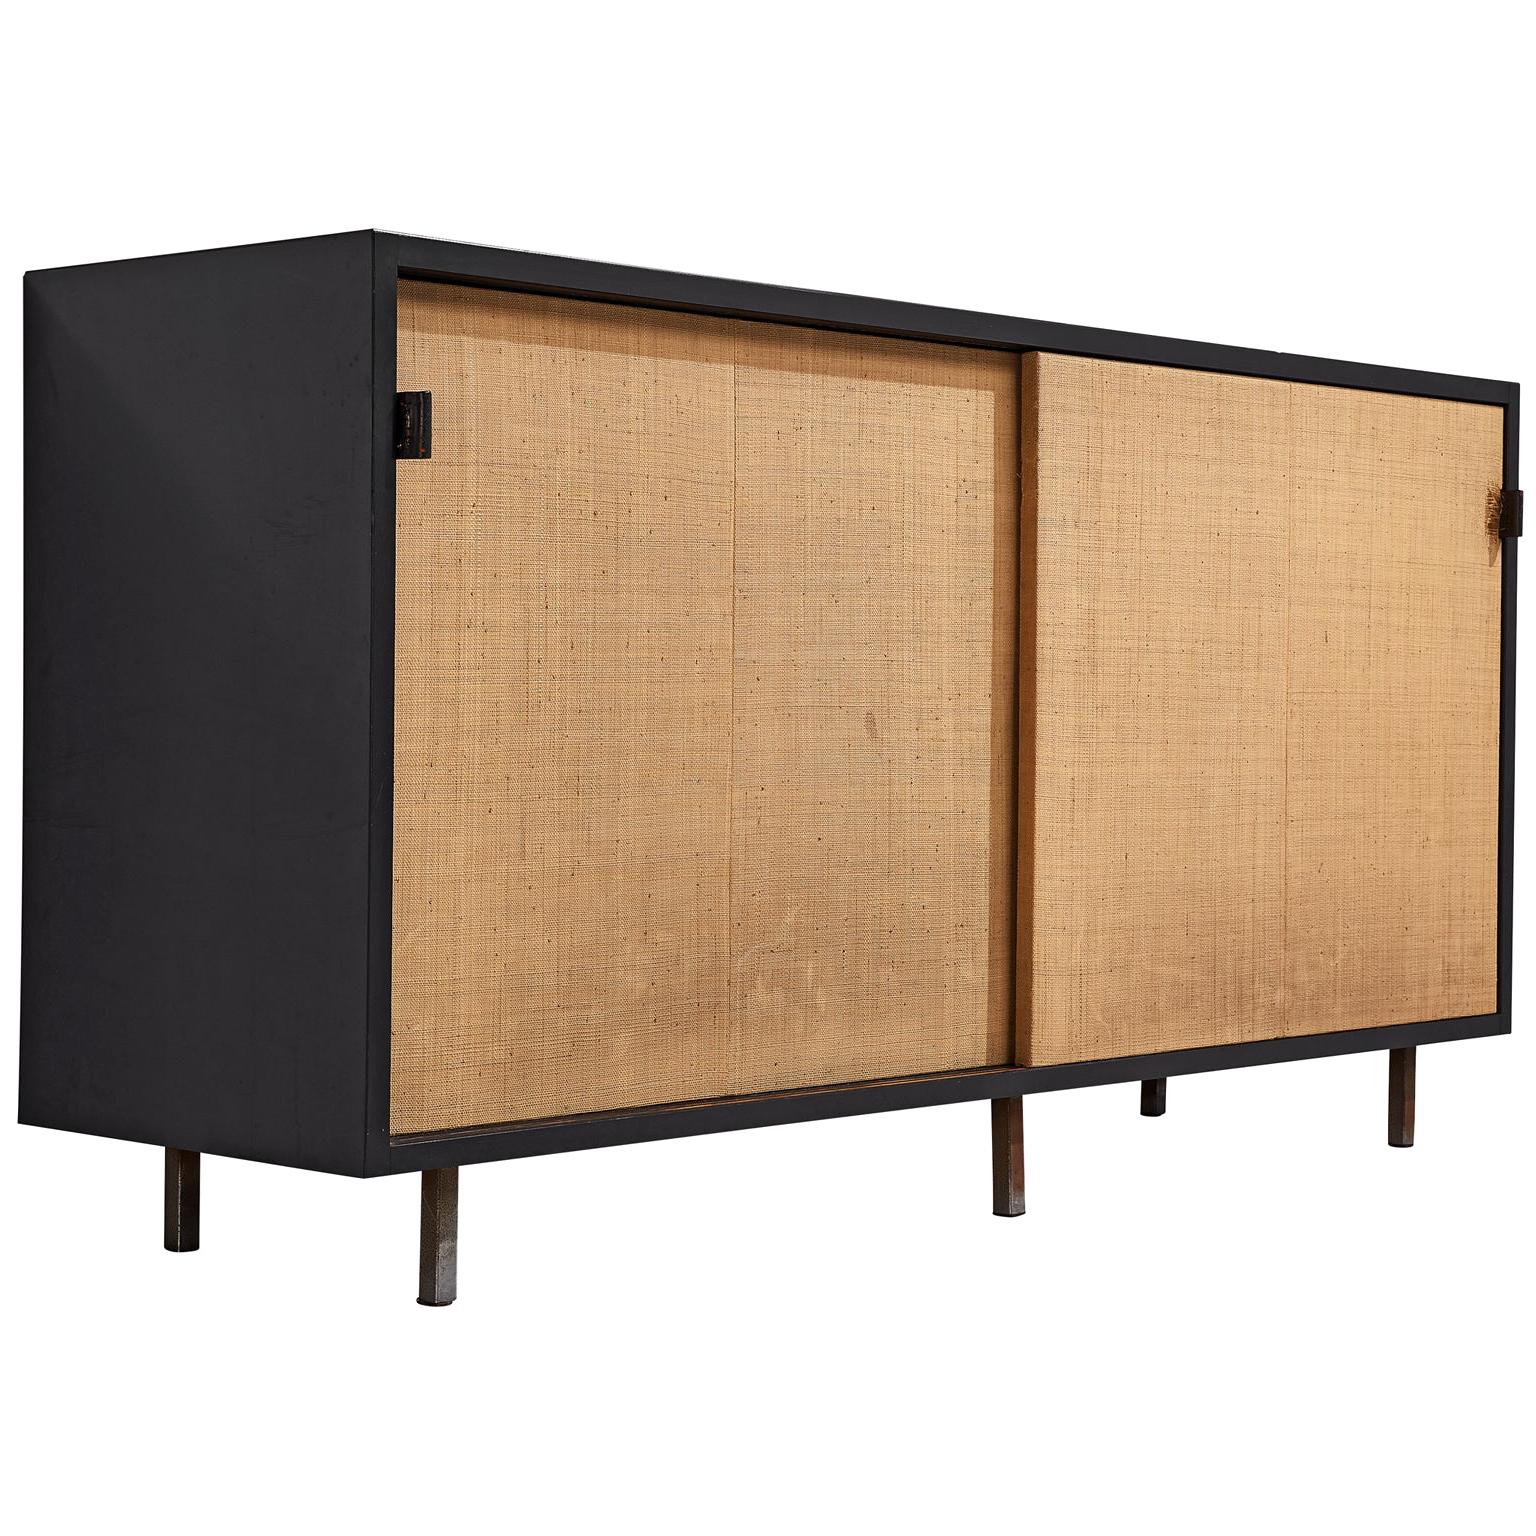 Early Florence Knoll Credenza with Cane Sliding Doors